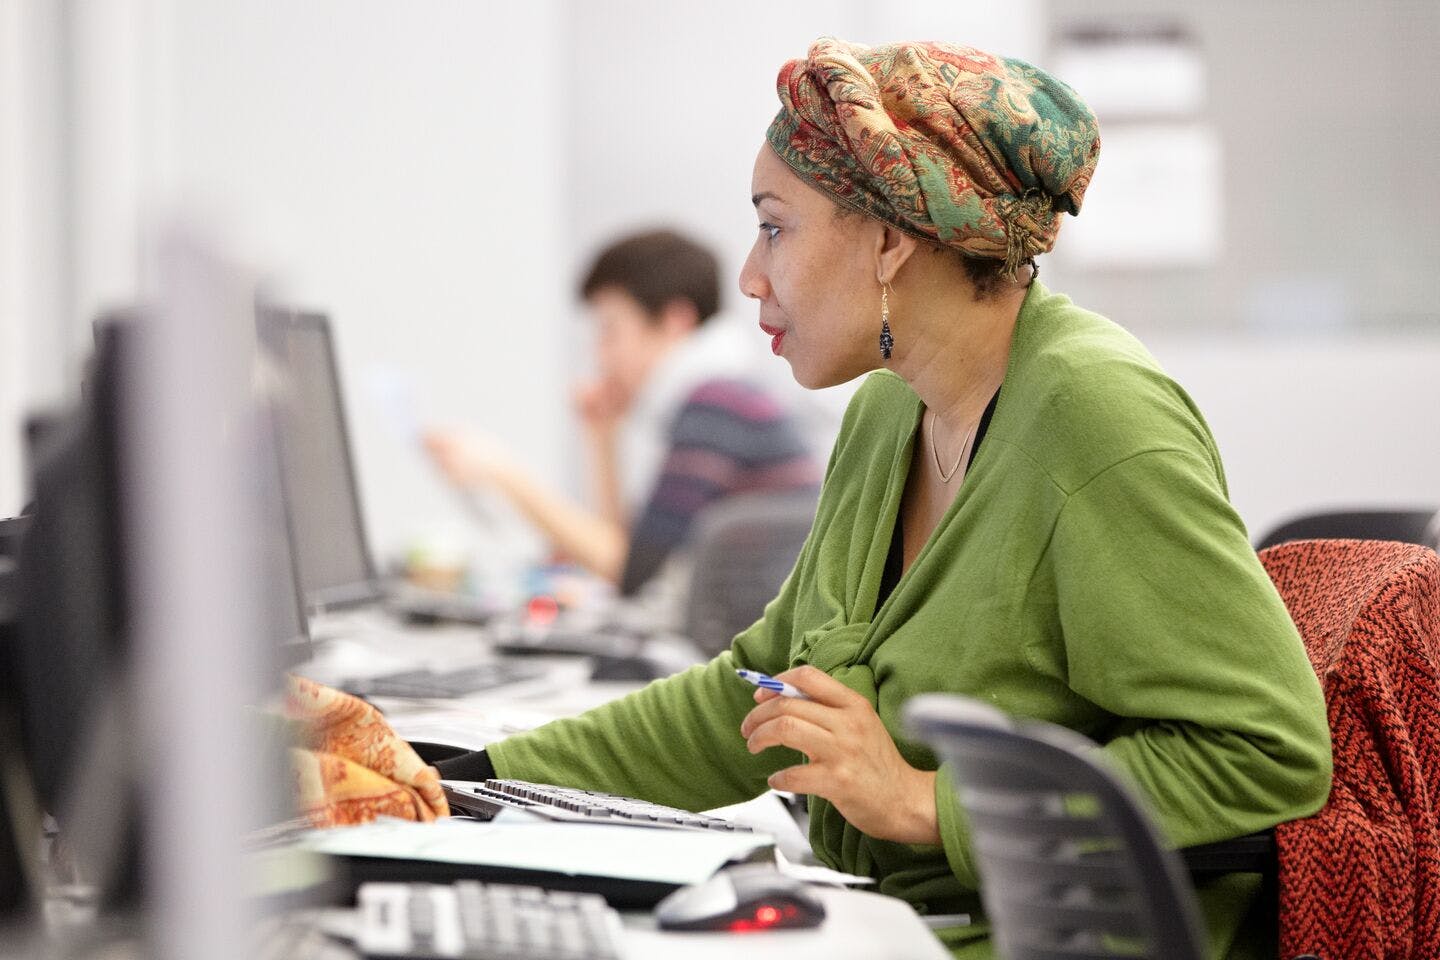 A woman works on a project on a computer.